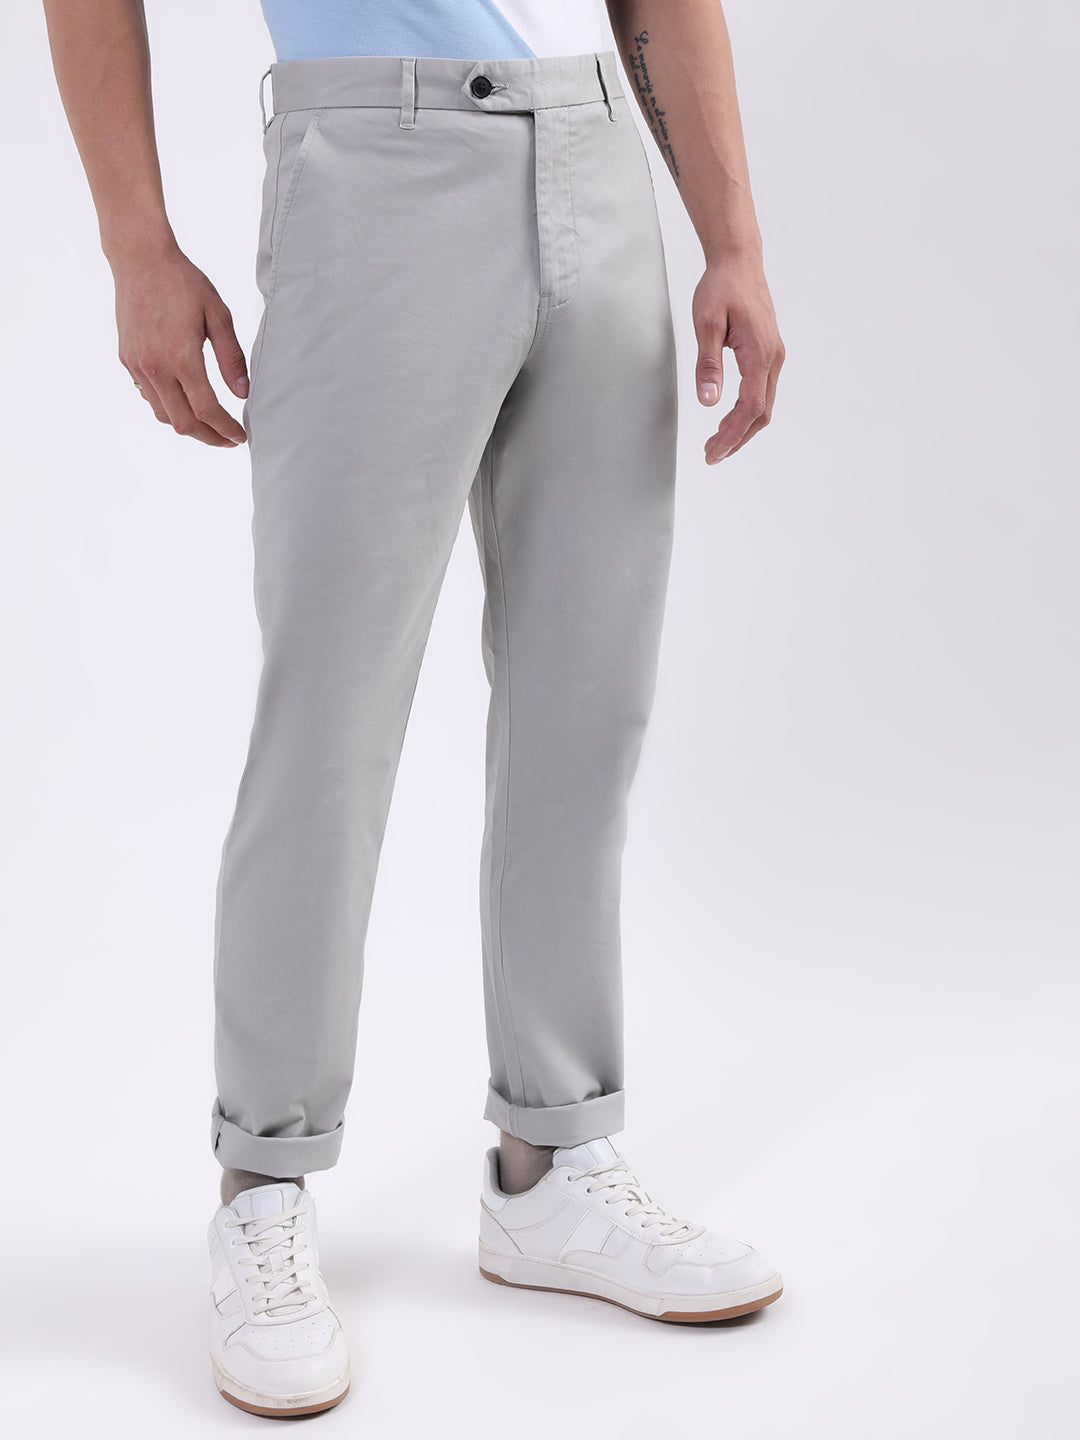 Mens Chino Pants Regular Fit Flat-Front Casual Stretch Relaxed Cotton  Trouser | eBay